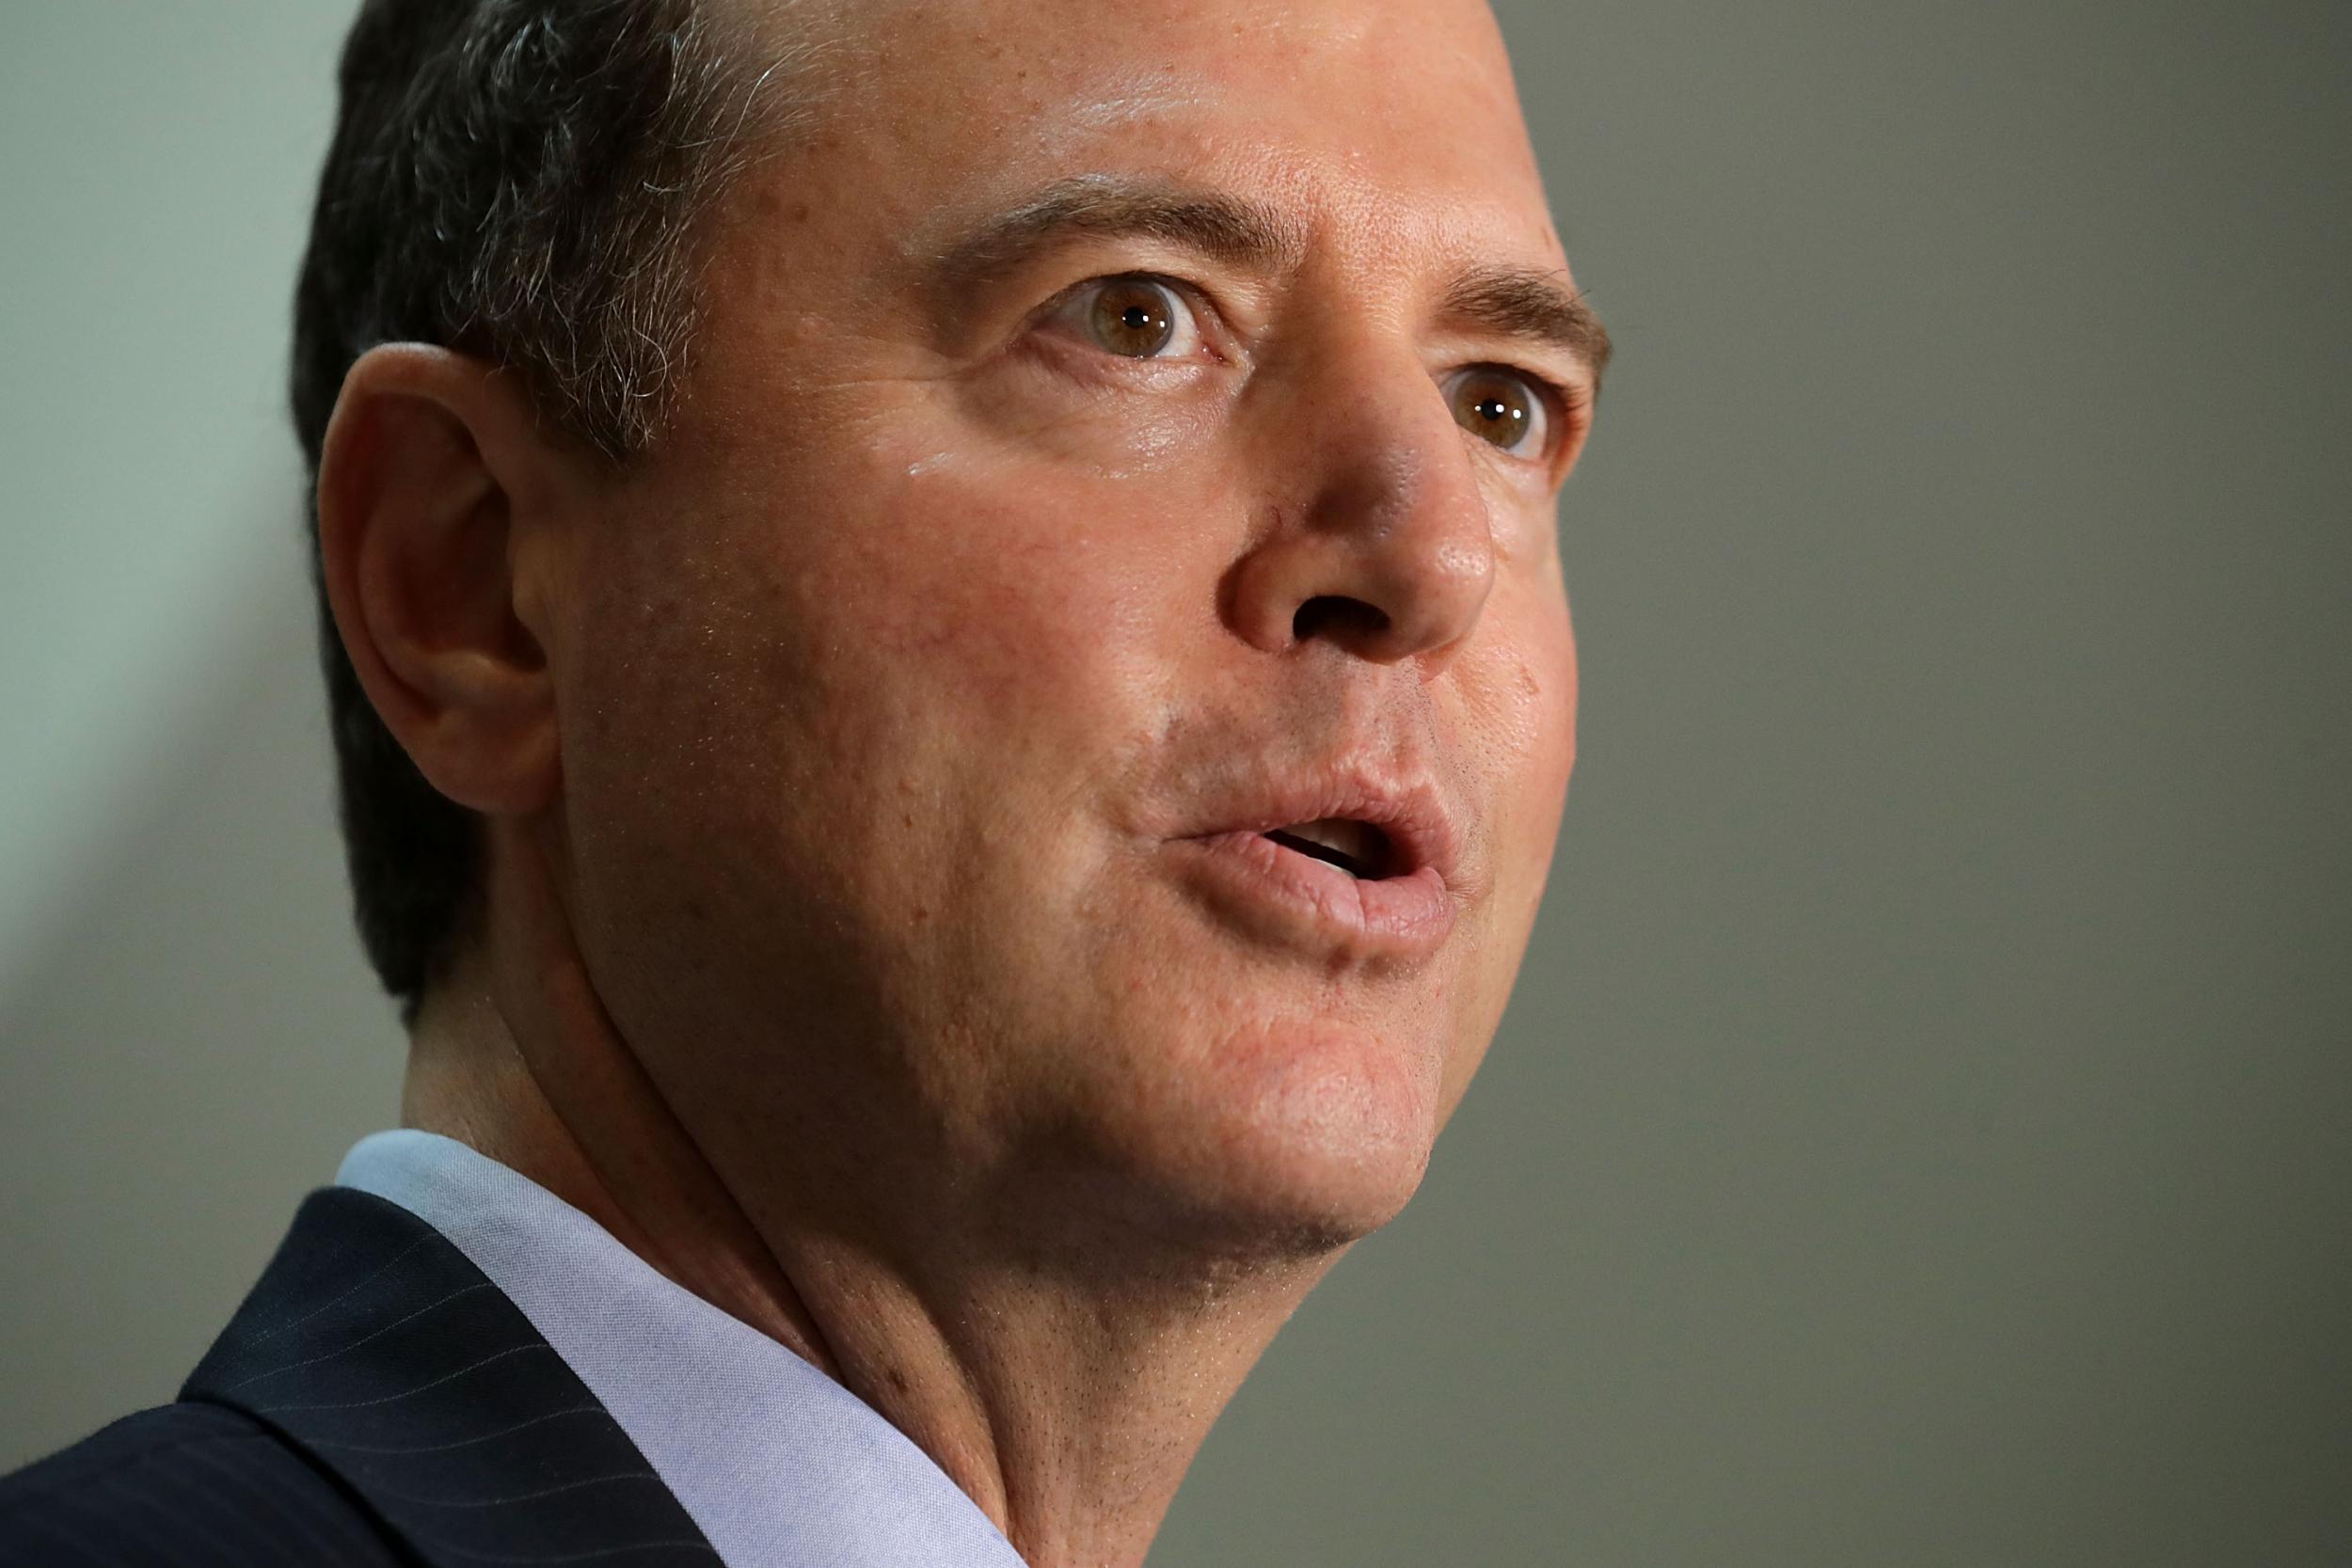 House Intelligence Committee ranking member Representative Adam Schiff says Democrats have drafted a response to a controversial Republican memo